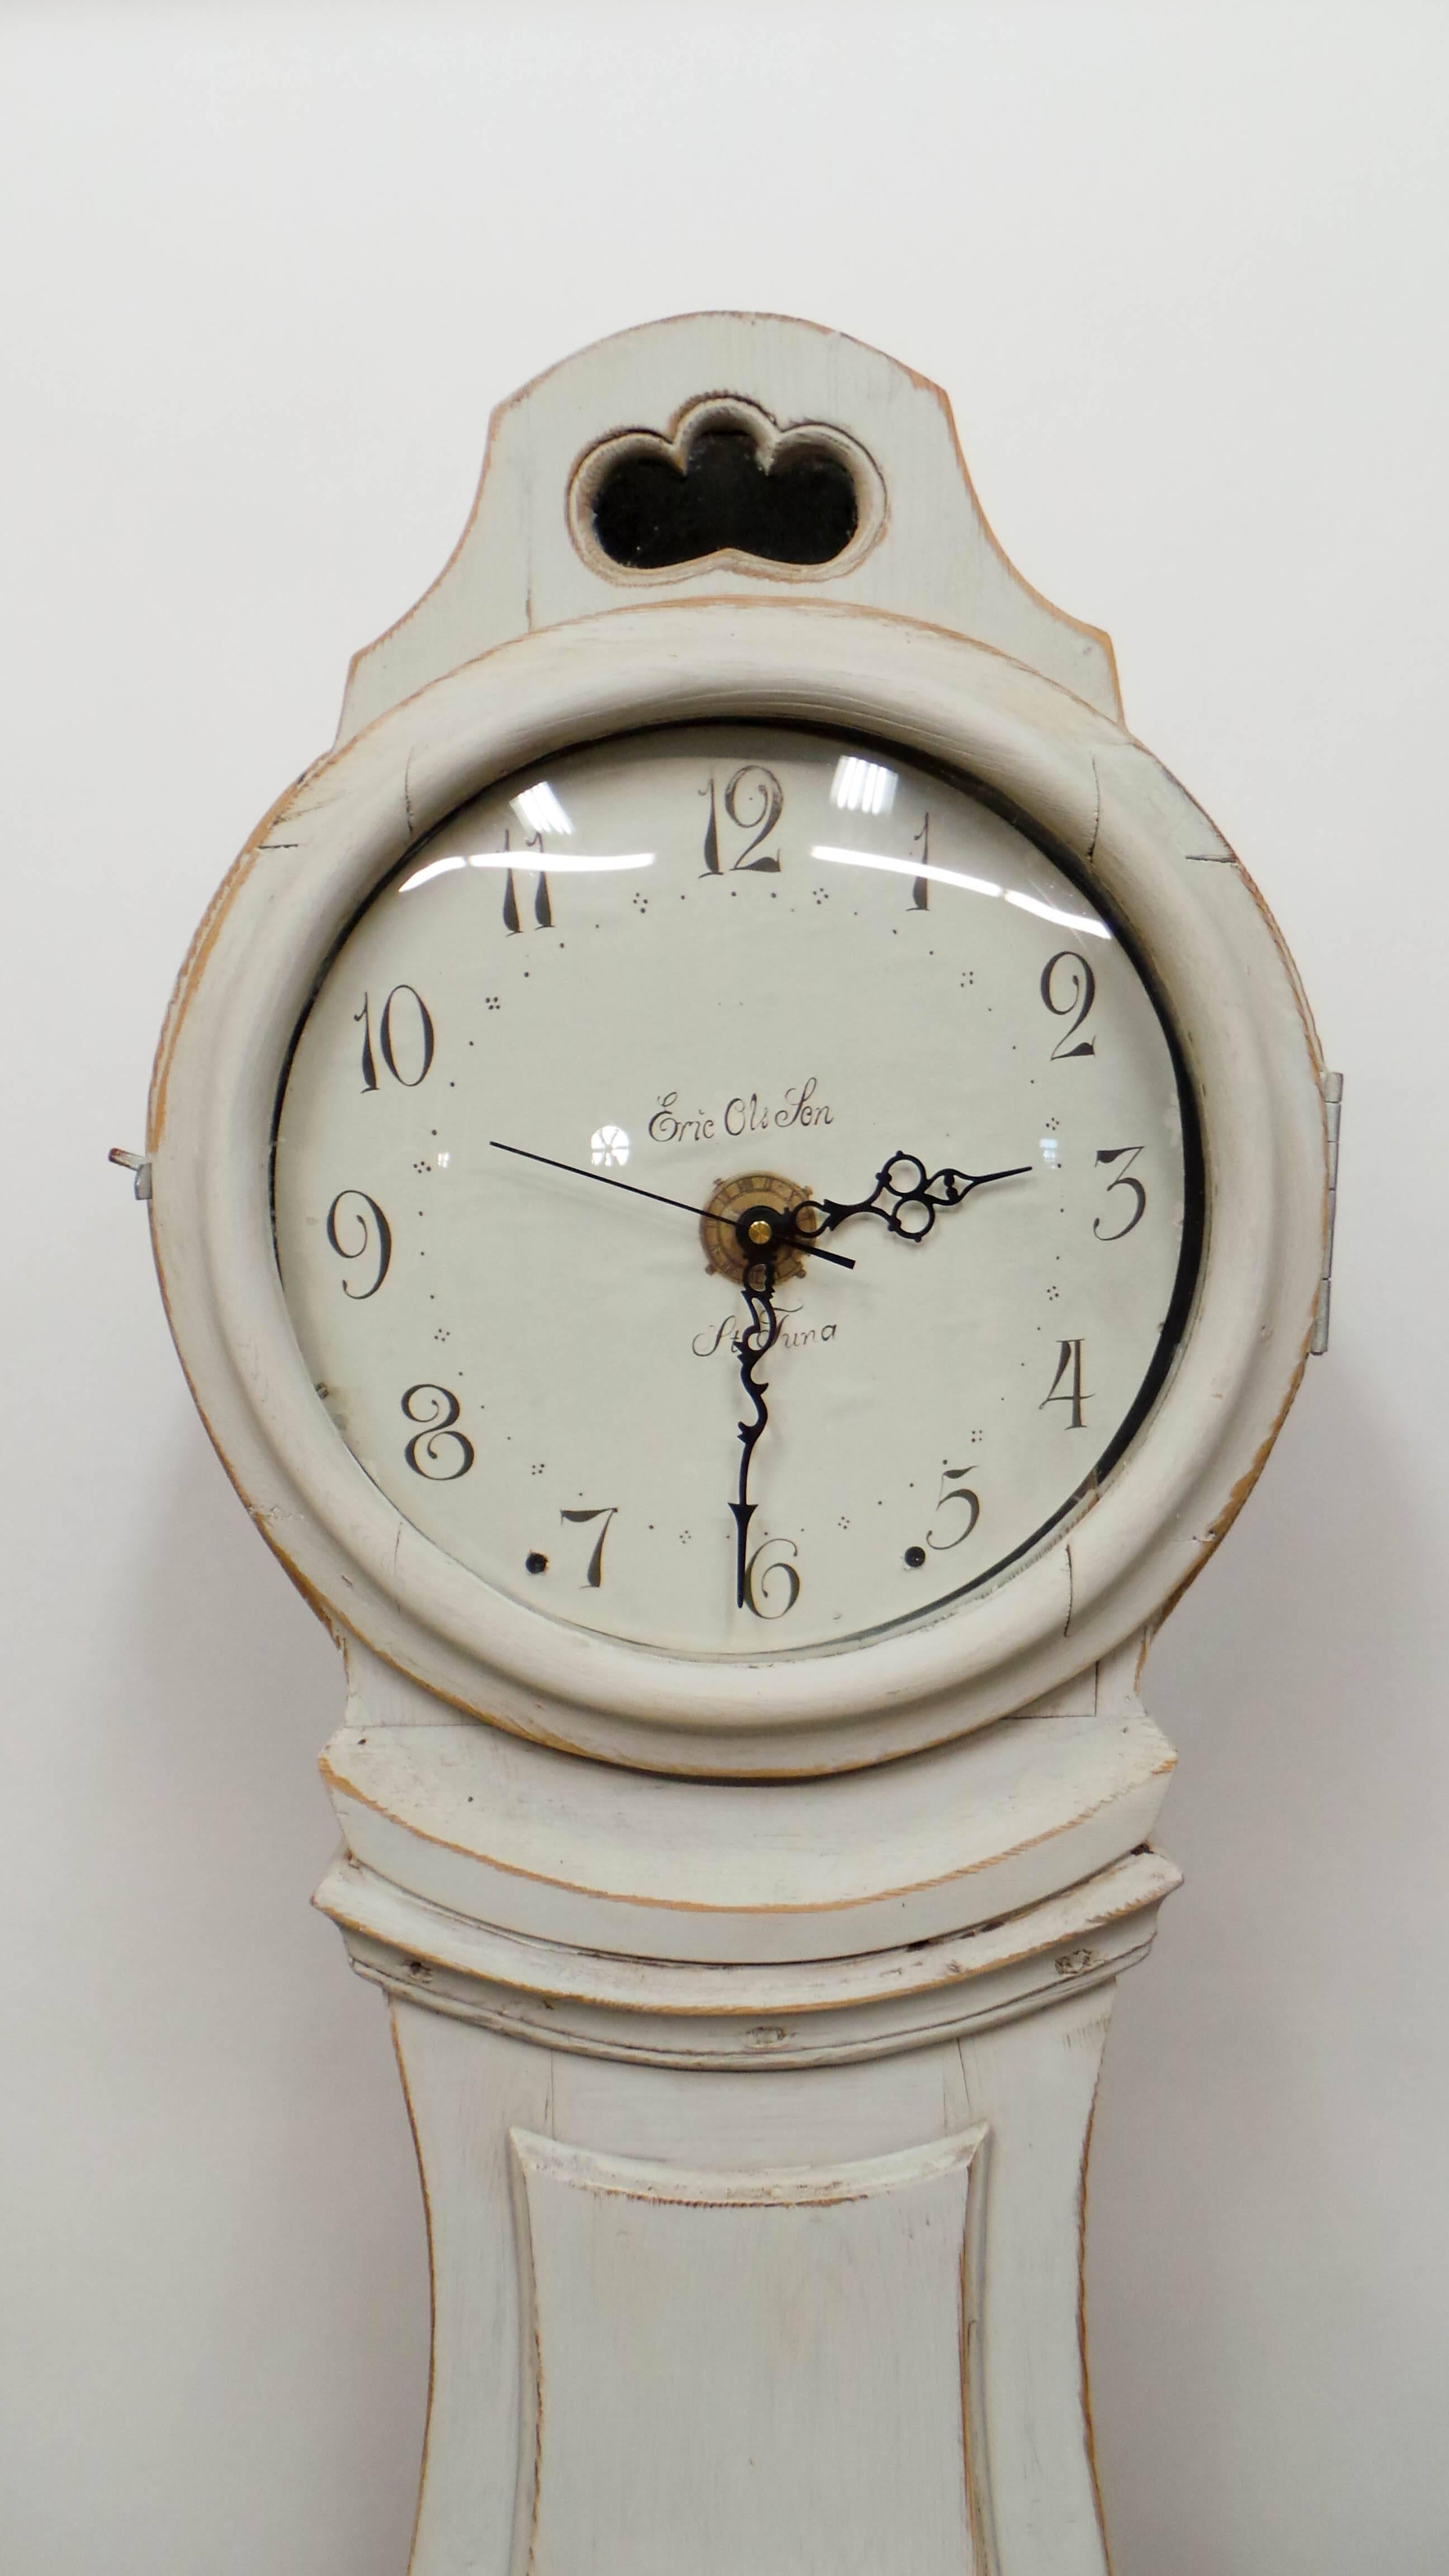 This is a Swedish long case mora clock, it’s been restored and new battery works have been installed. The original works do come with the clock, we just can’t guarantee them to work. I found this clock at an Estate auction in Stockholm, Sweden.